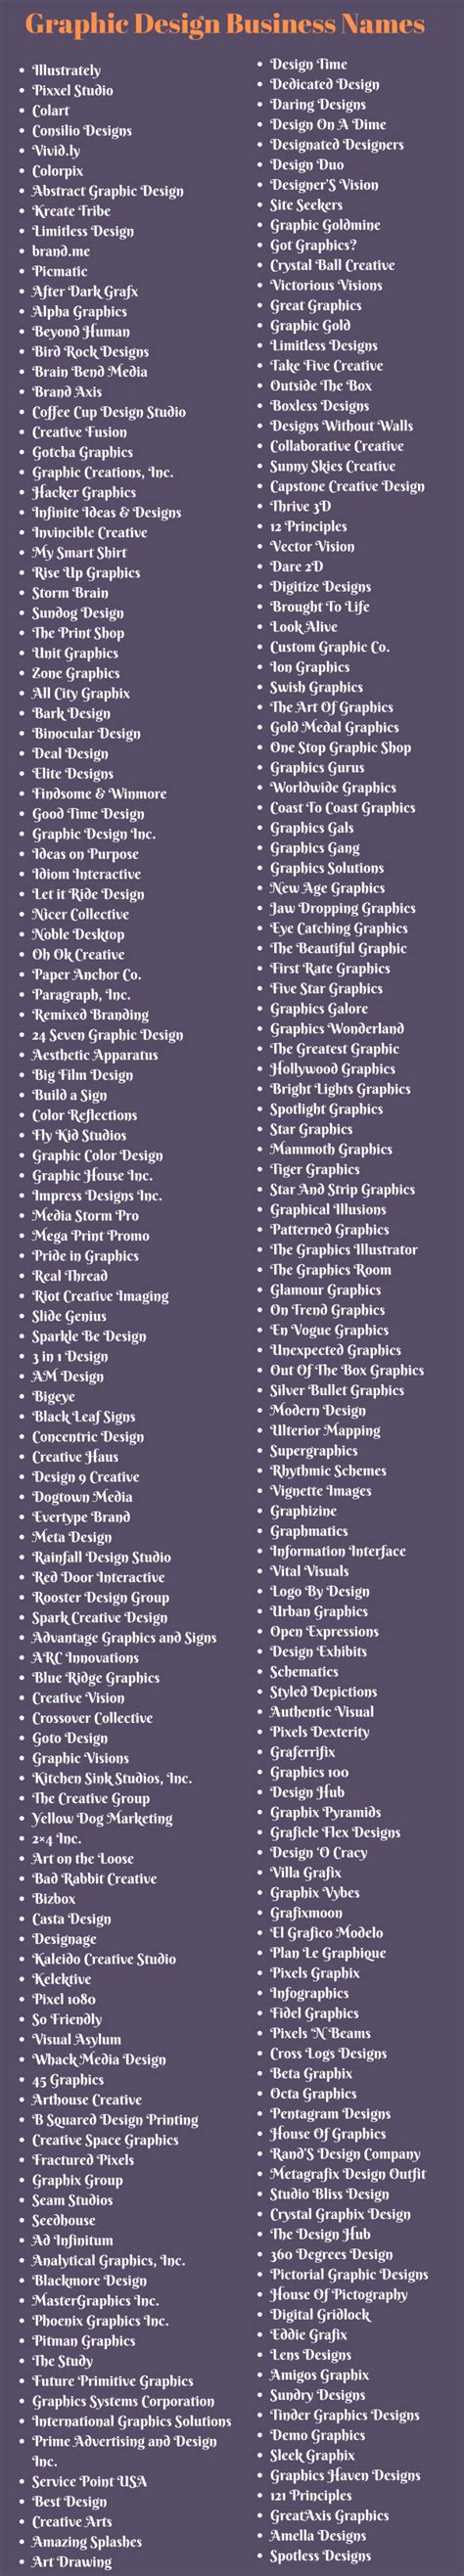 Graphic Design Business Names 400 Names For Design Business